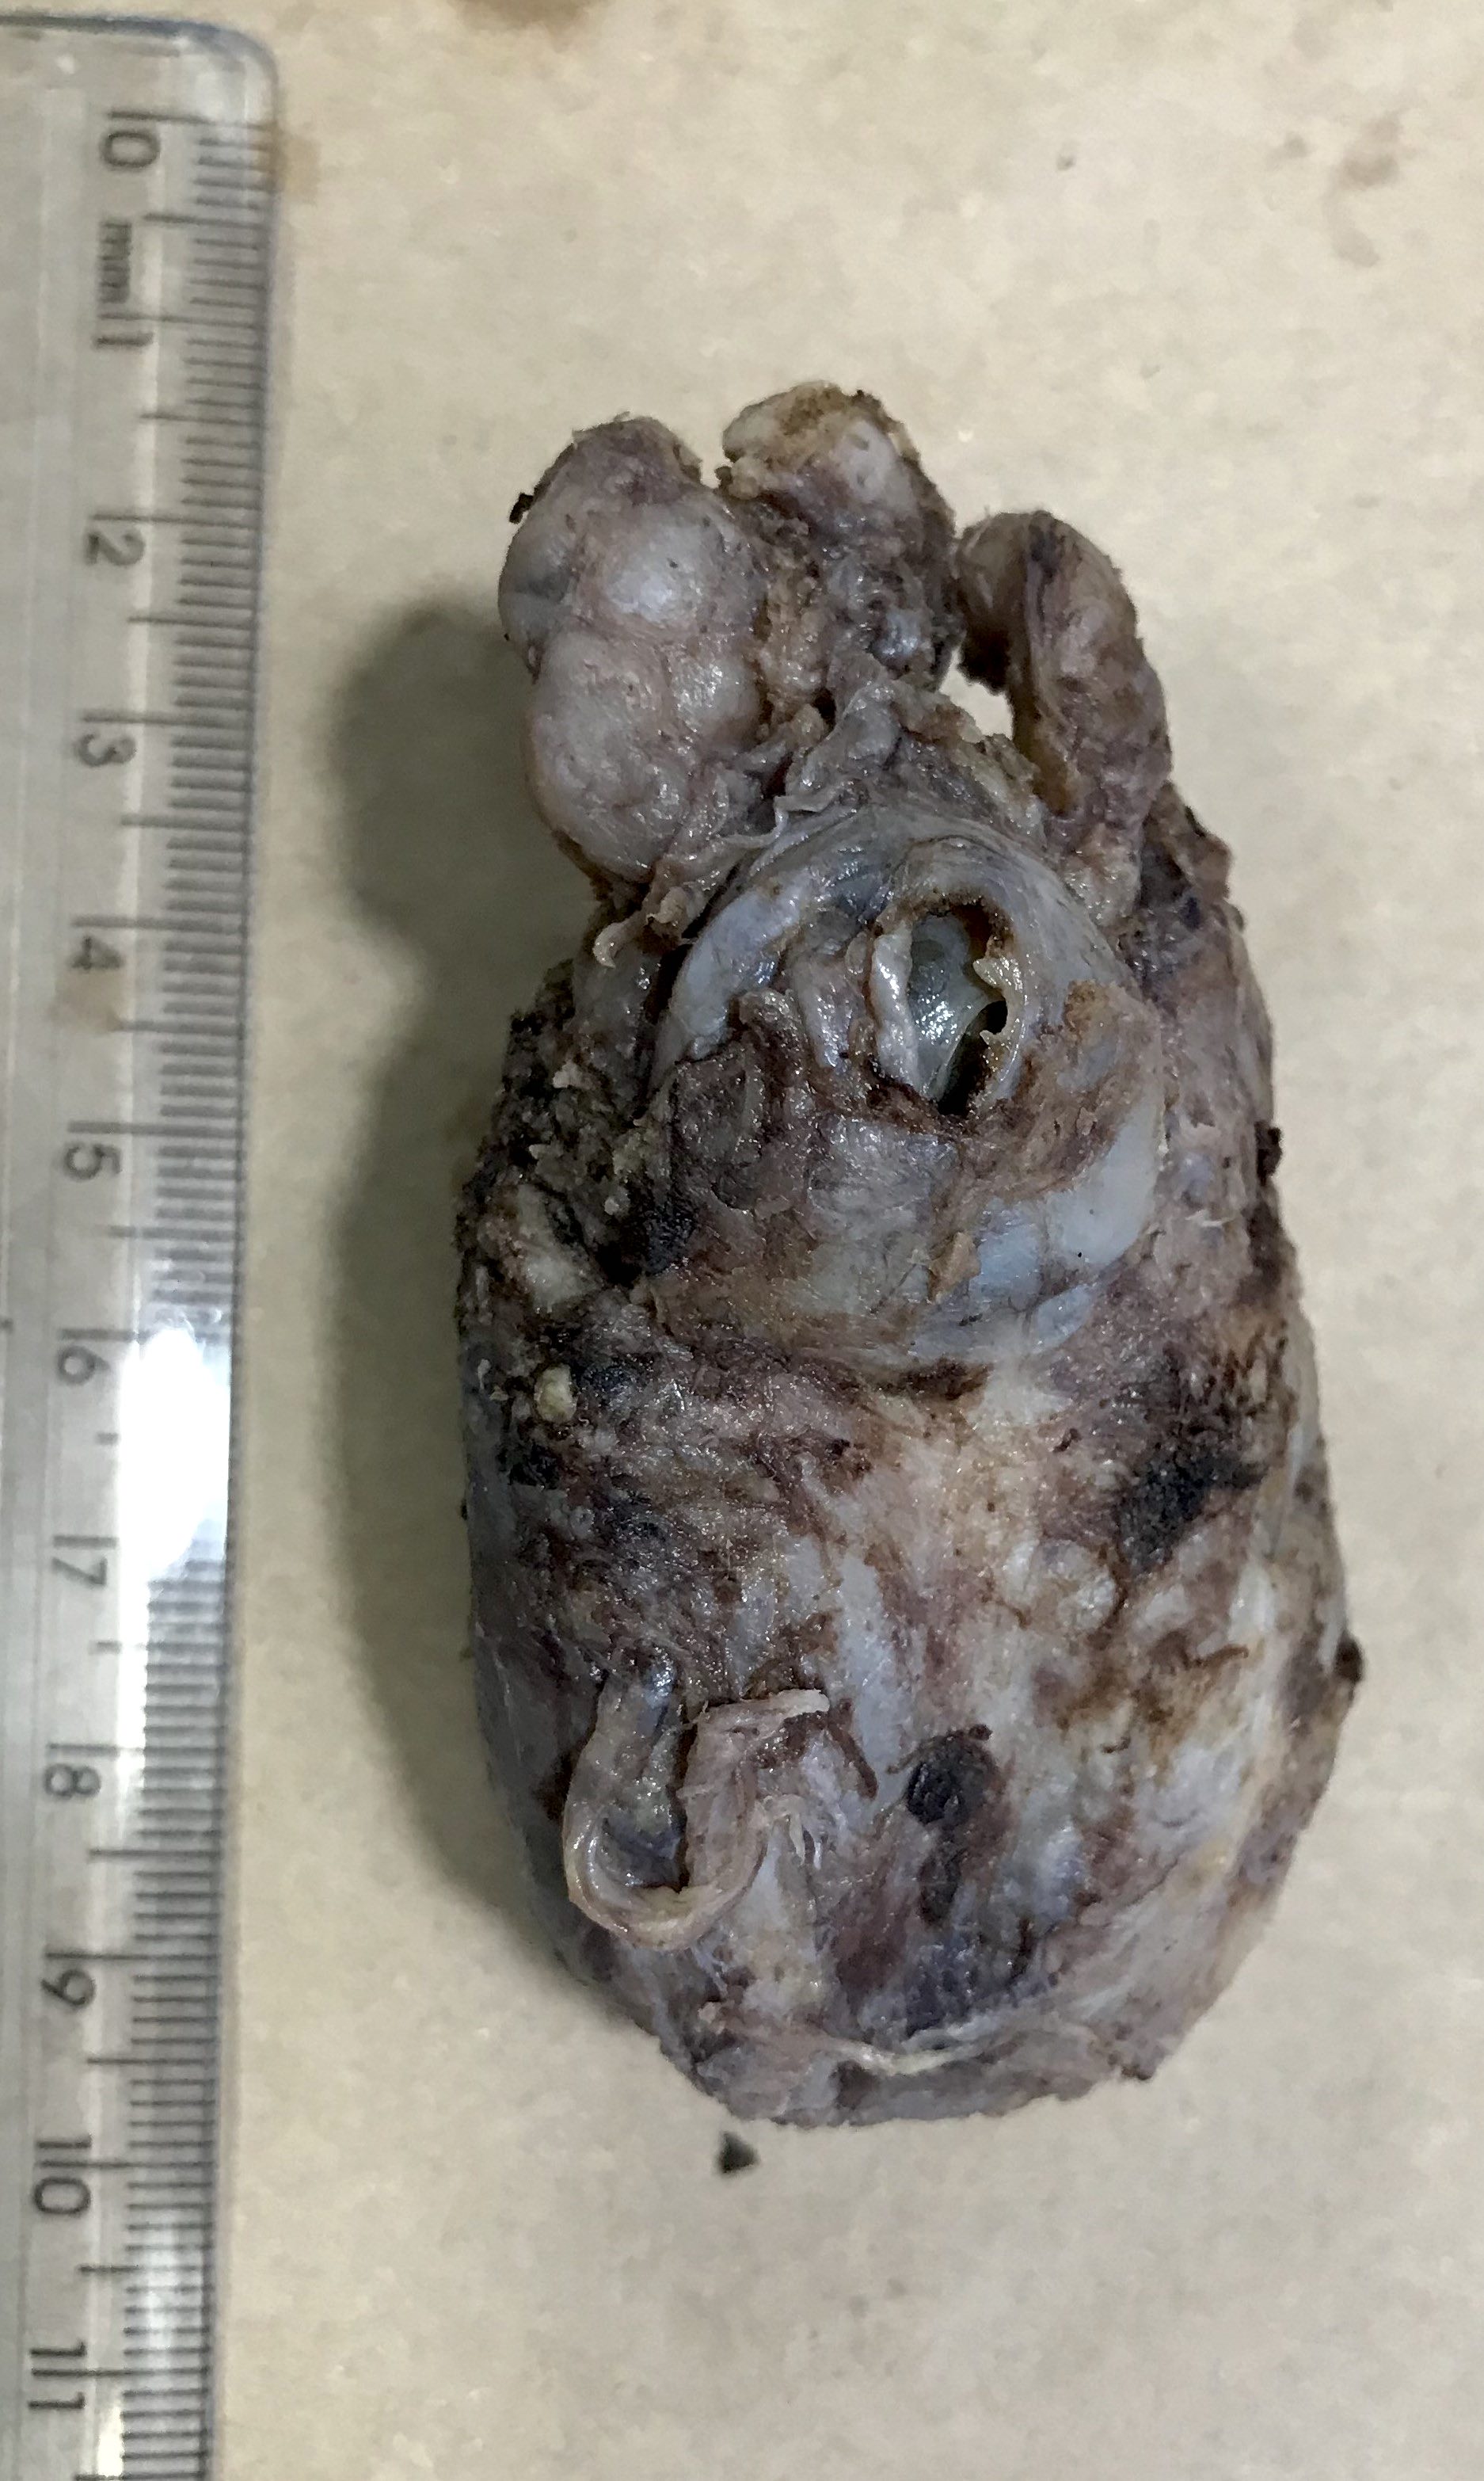 Cystic mass centered in the seminal vesicle